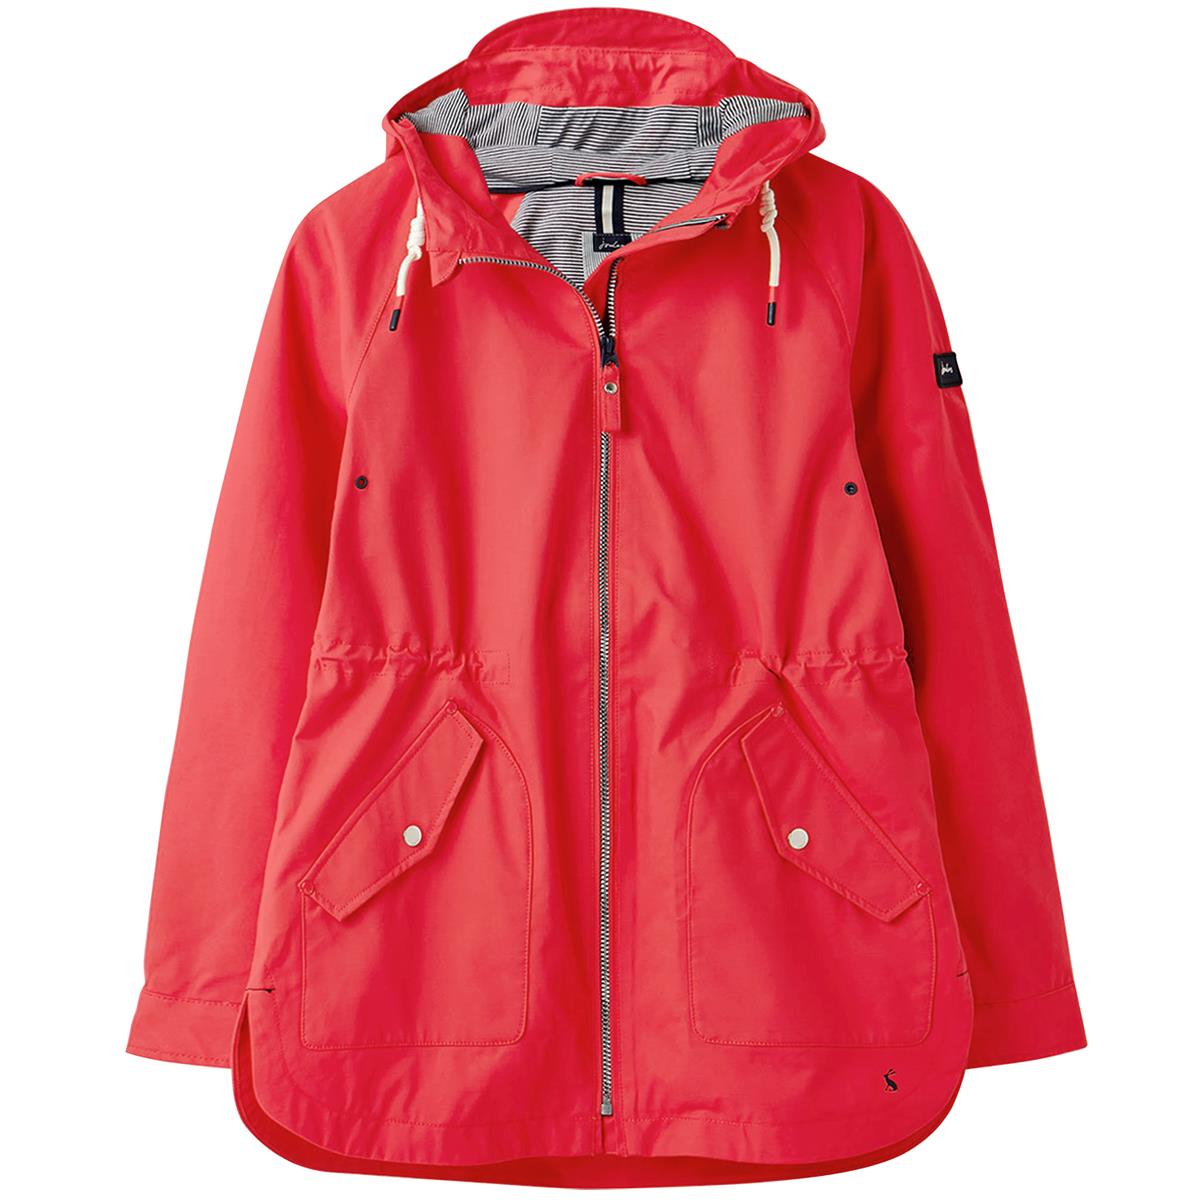 What are the features of the joules shoreside coastal waterproof jacket?